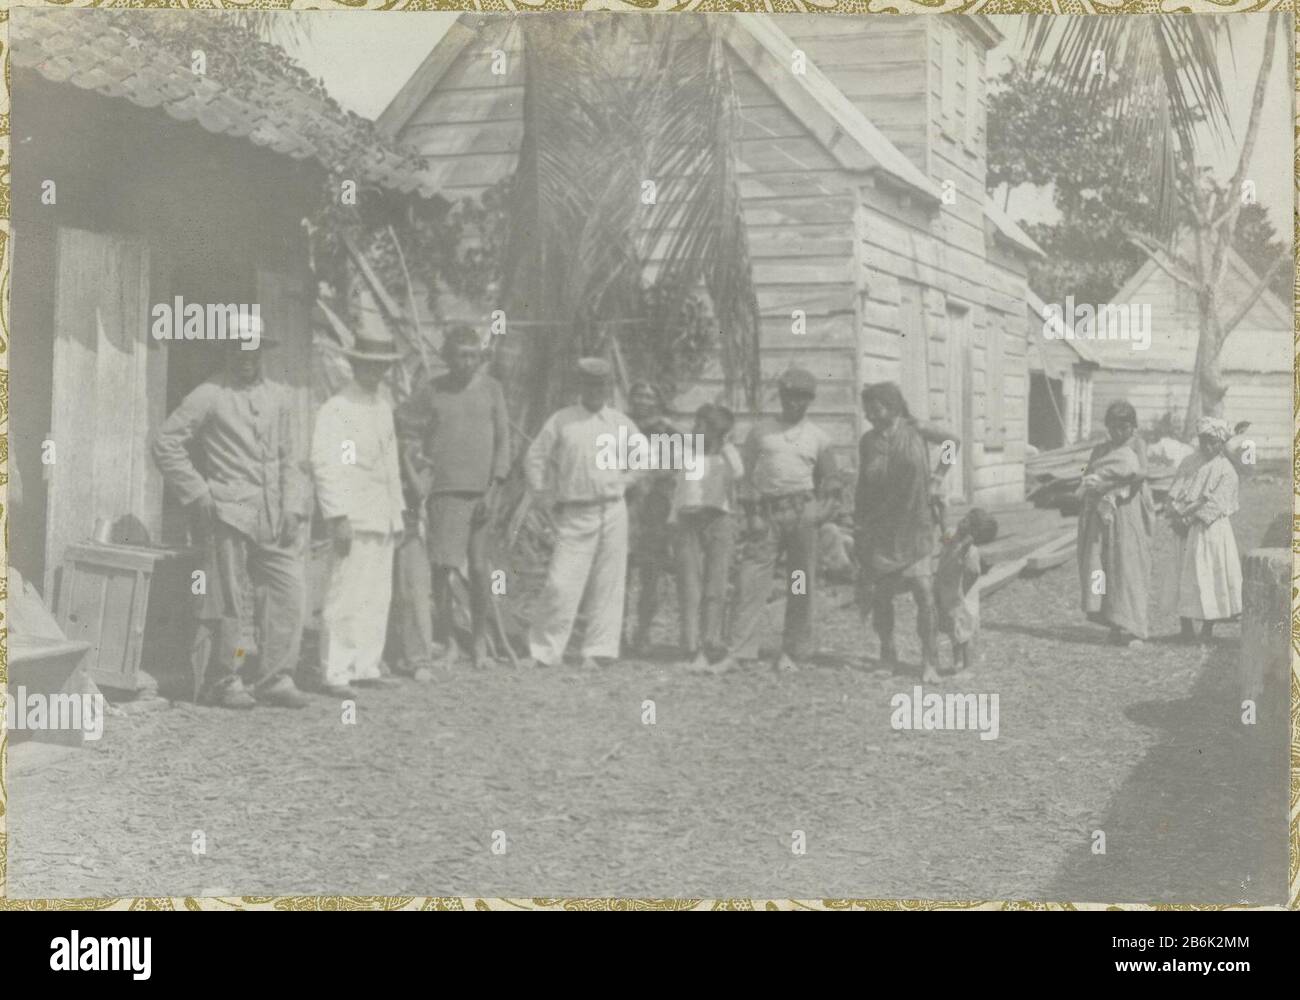 Dorpelingen A group of villagers standing in front of some houses. Part of the album Souvenir de Voyage (Part 1), about the life of the Doijer family in and around the plantation Ma Retraite in Suriname during the years 1906-1913. Manufacturer : Photographer: Hendrik Doijer (attributed to) Place manufacture: Suriname Date: 1906 - 1913 Physical features: gelatin silver print material: paper Technique: gelatin silver print dimensions: photo: h 115 mm × W 166 mm Date: 1906 - 1913 Stock Photo